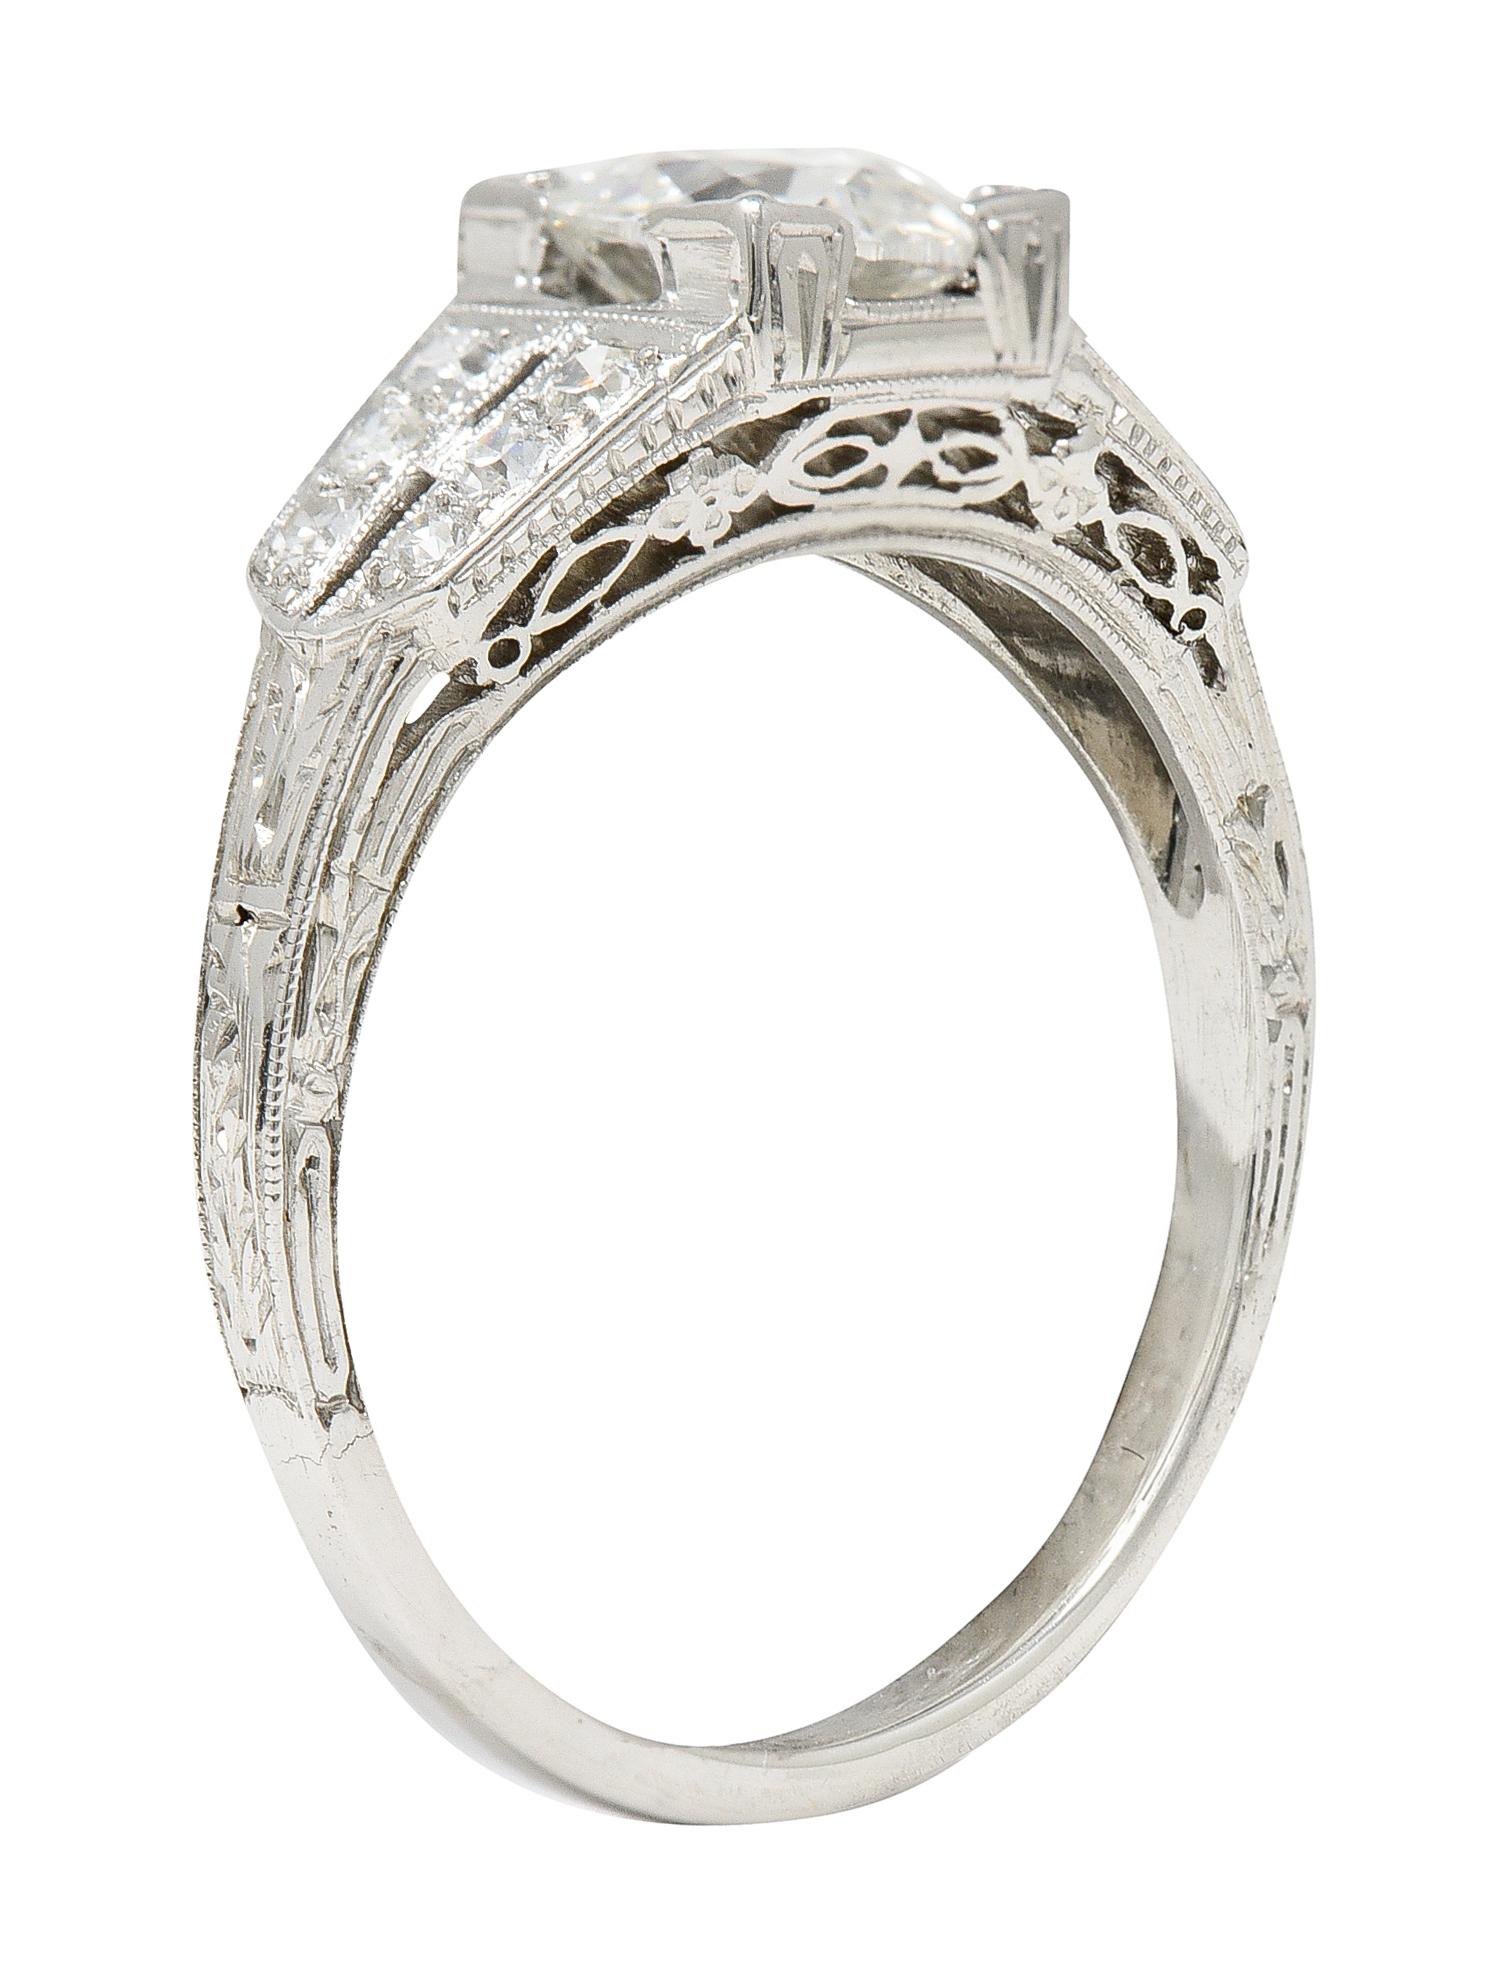 Ring centers a 0.96 carat old European cut diamond - H in color with S12 clarity. Set in an engraved square form head and flanked by bead set single cut diamonds. Weighing approximately 0.18 carat total - eye clean and bright. Accented by engraved